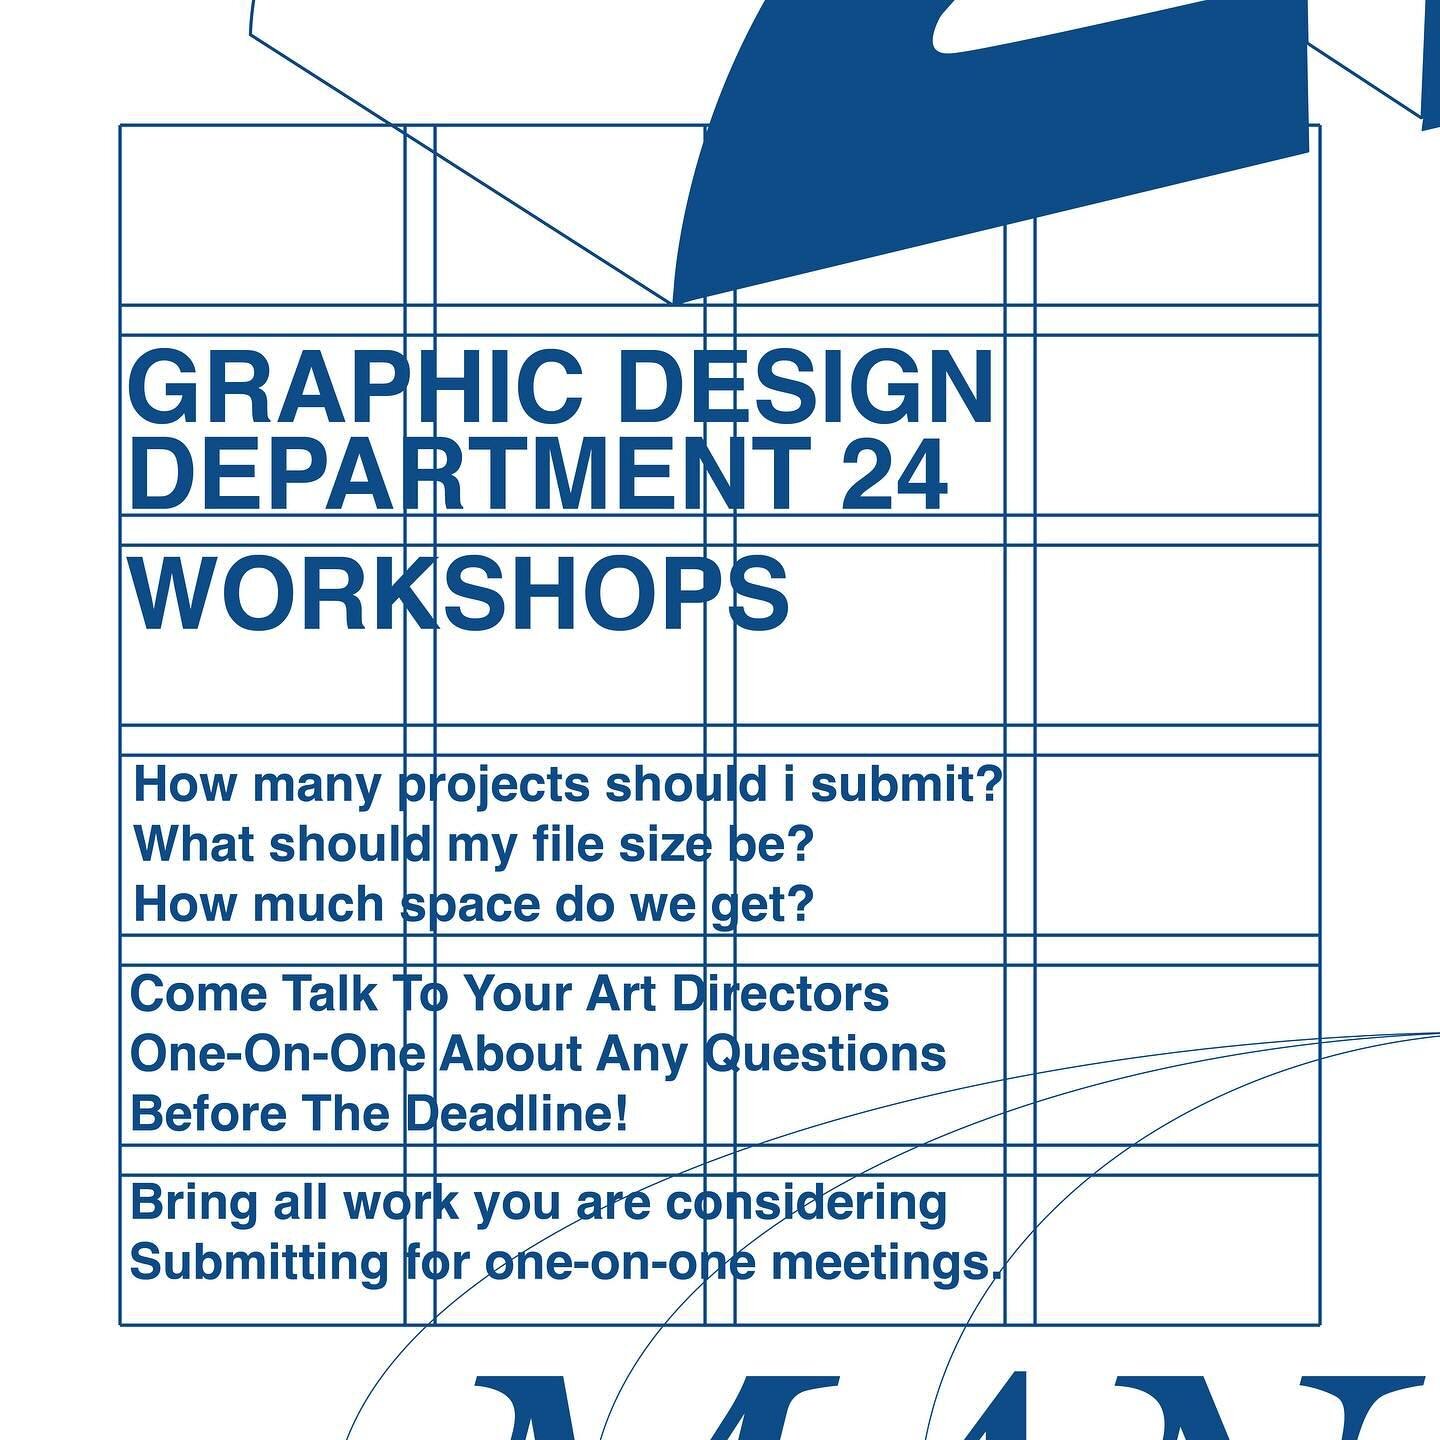 Hello, Department 24!

We are holding workshops this week to get everyone in the right headspace for our Manifest Showcase! In these meetings, we will be going over what work is best to submit for the gallery, website, and publication as well as how 